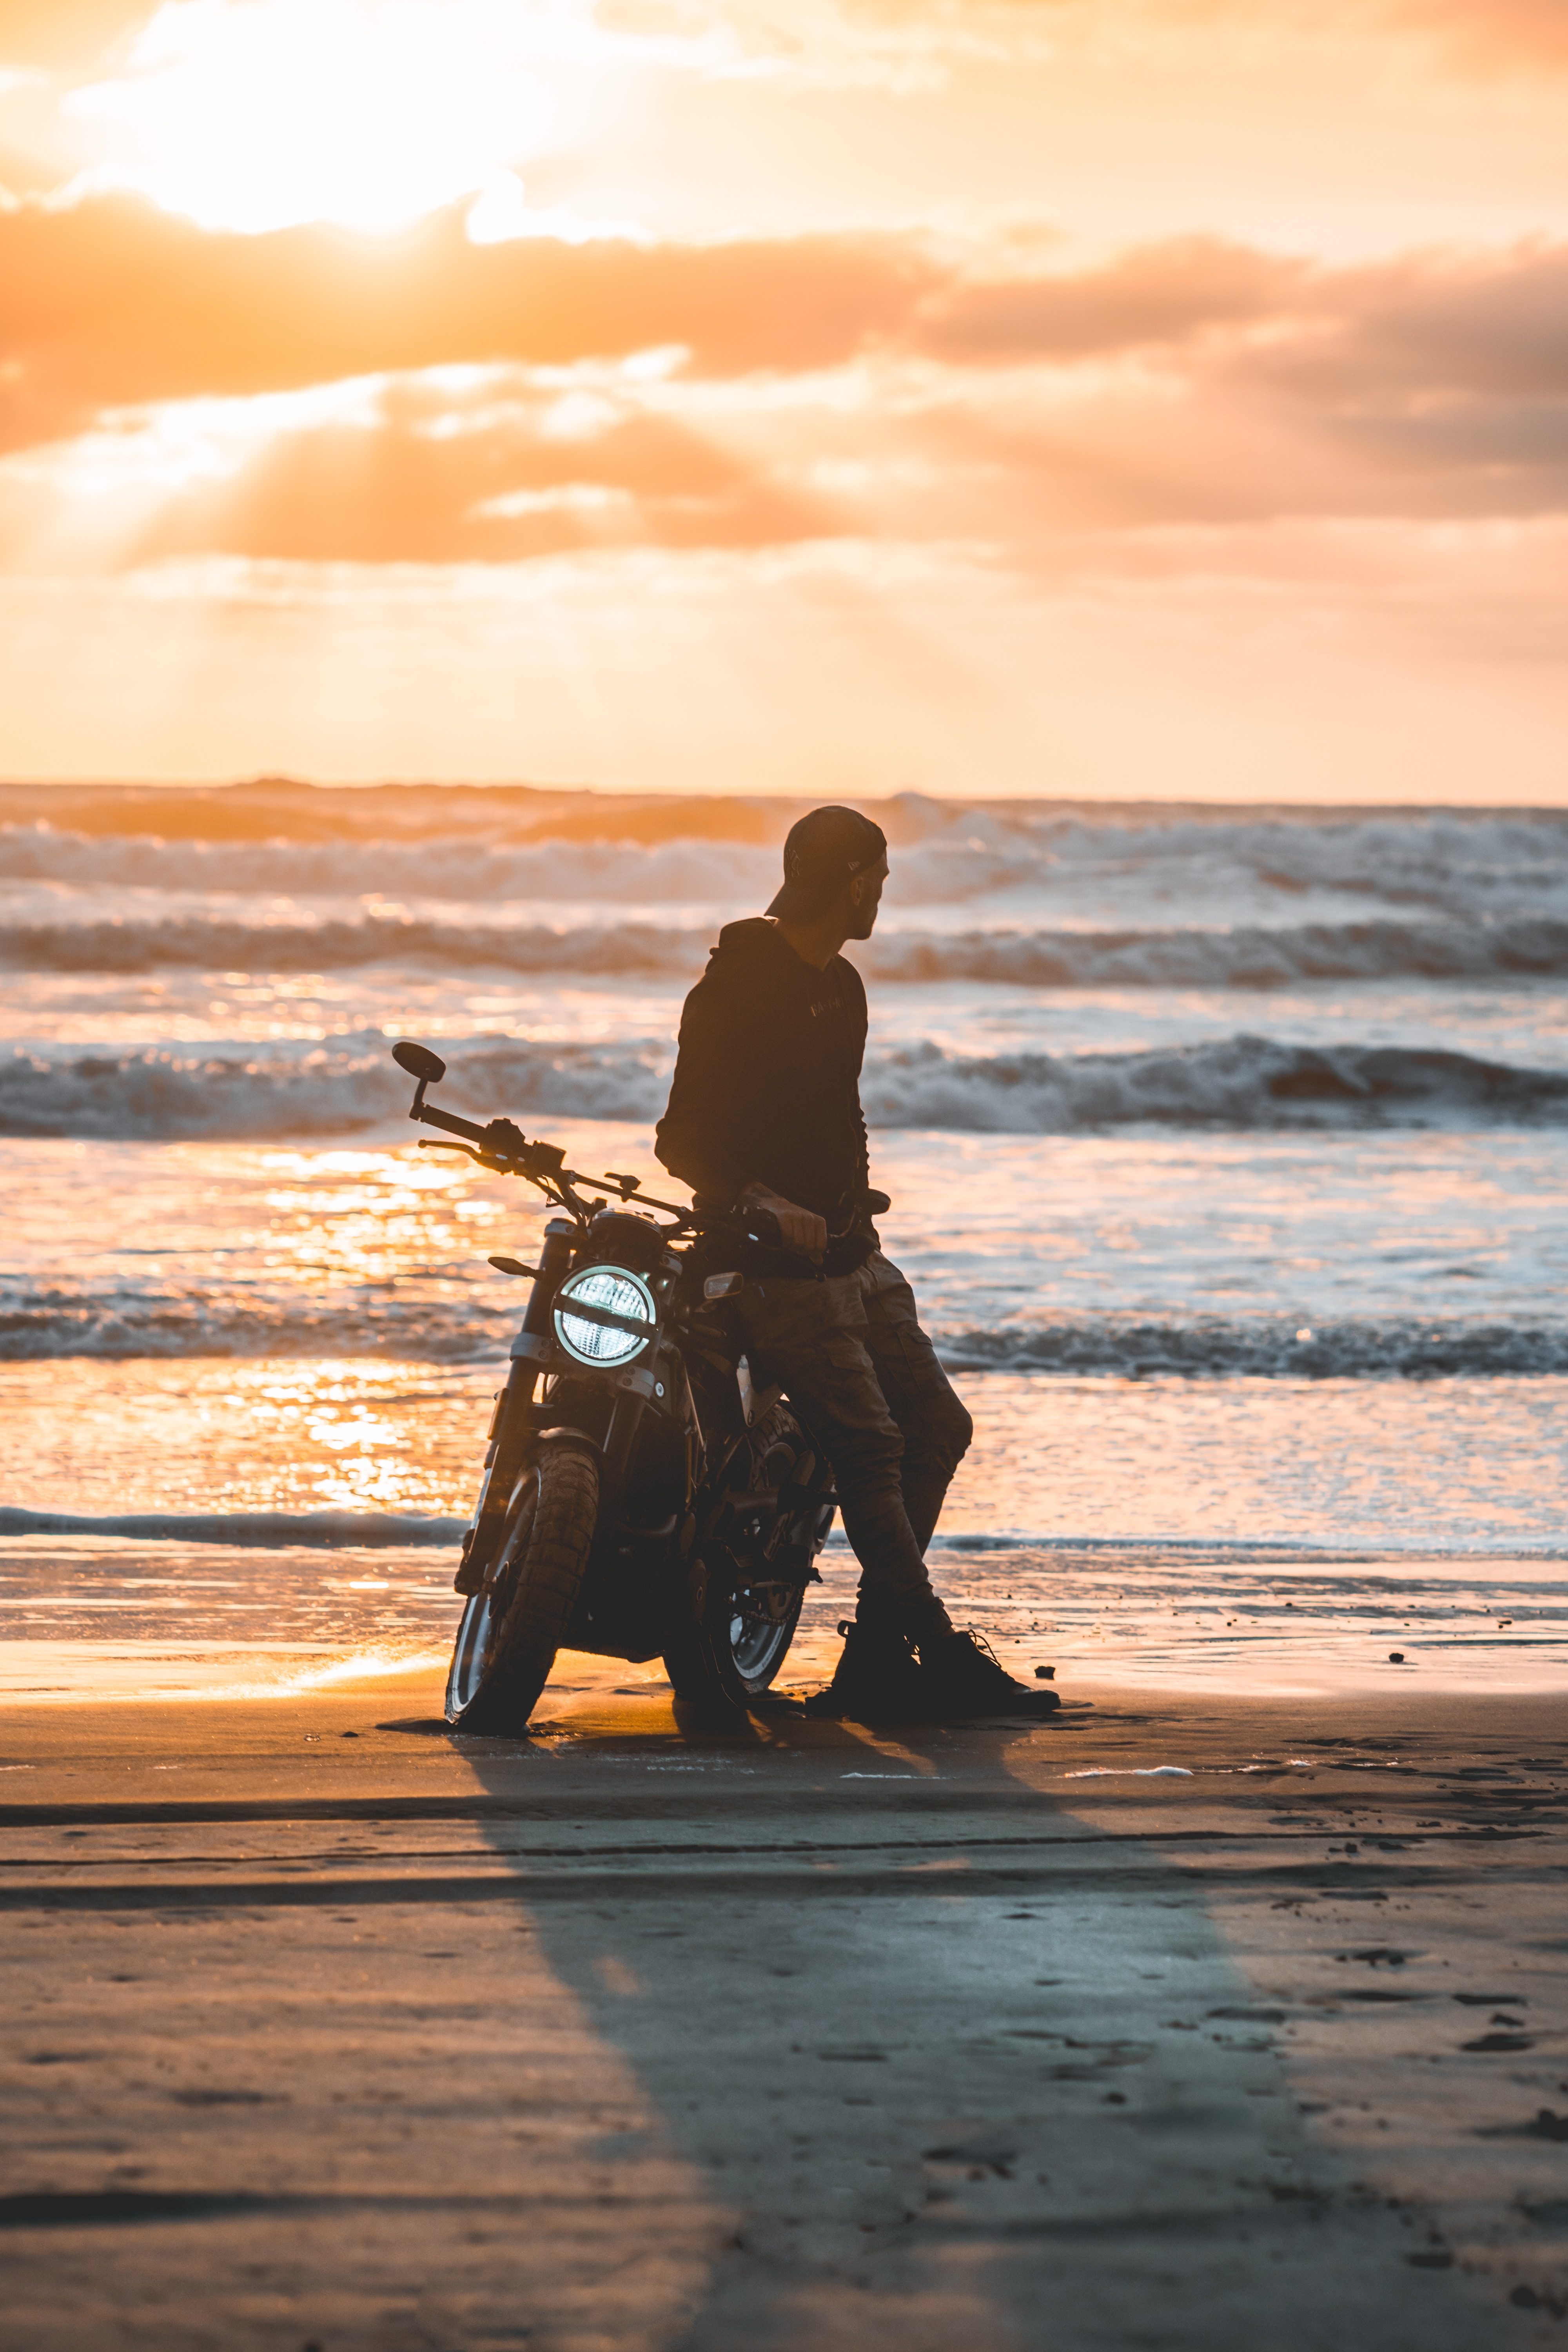 motorcycles, motorcycle, loneliness, motorcyclist, sunset, silhouette